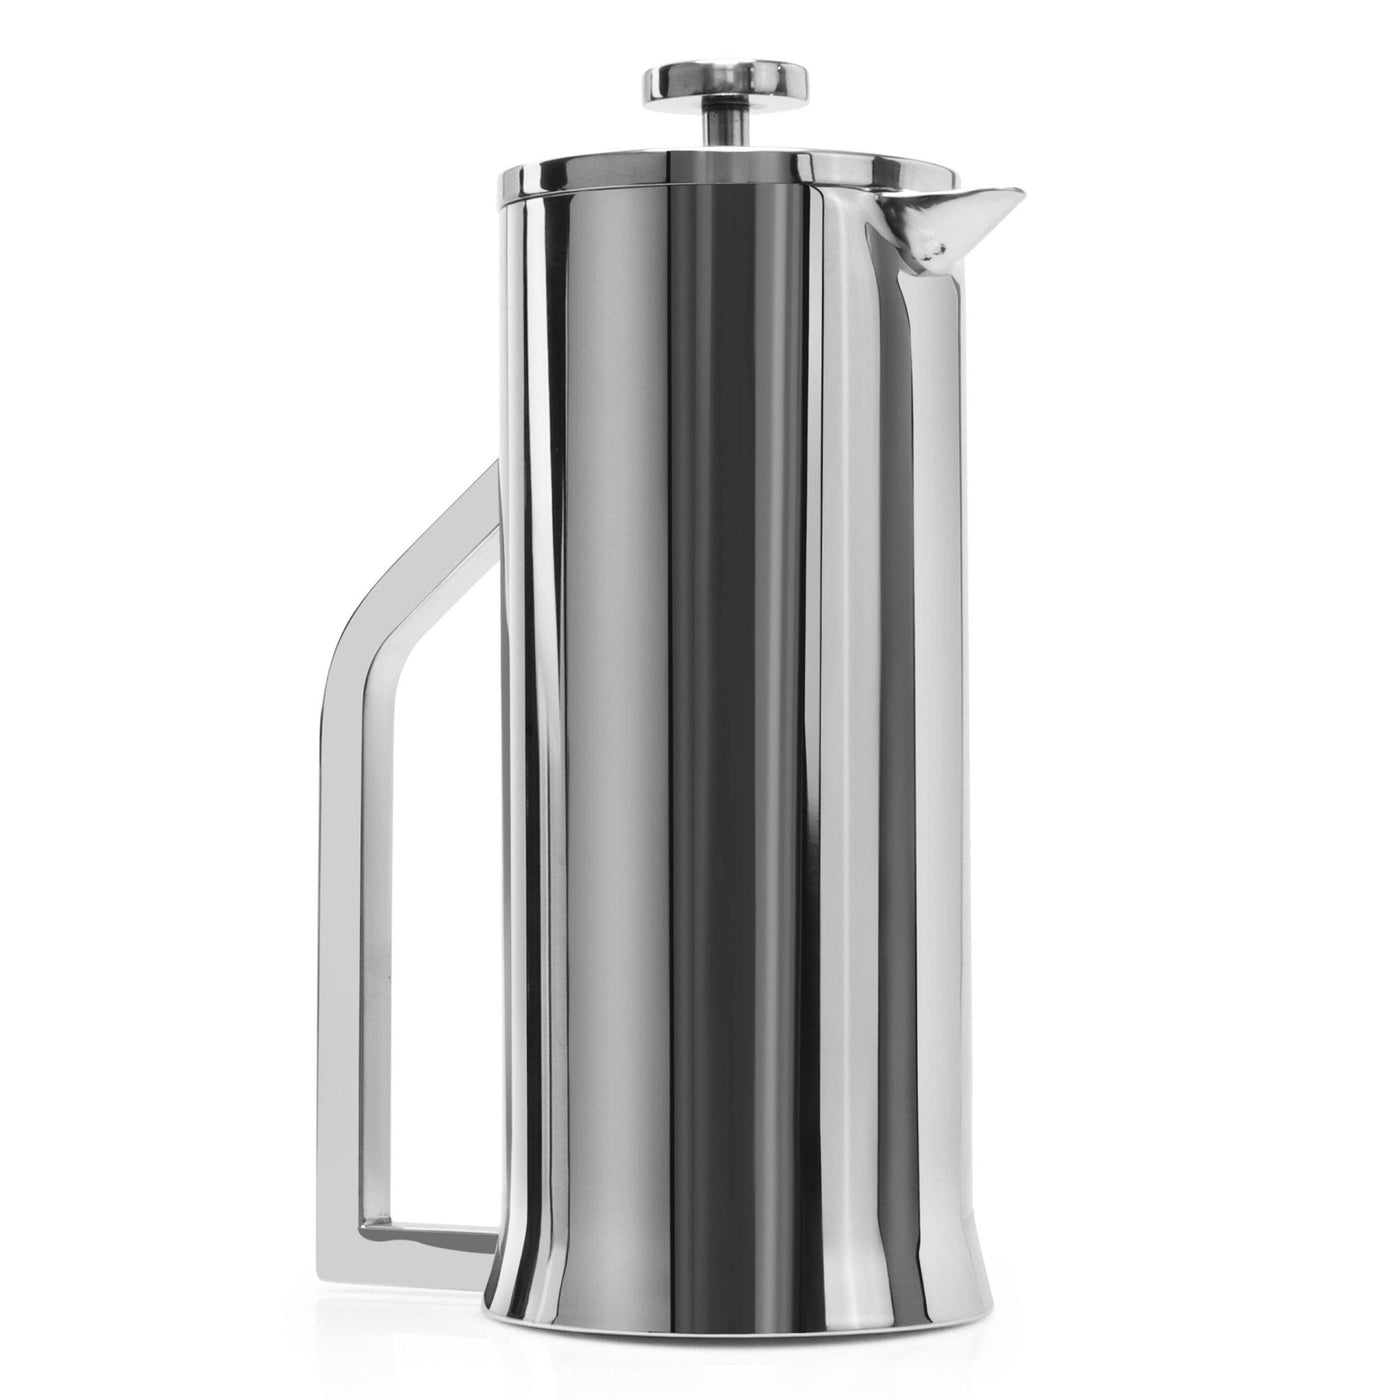 Large French Press Coffee Maker; Stainless Steel French Press 1000